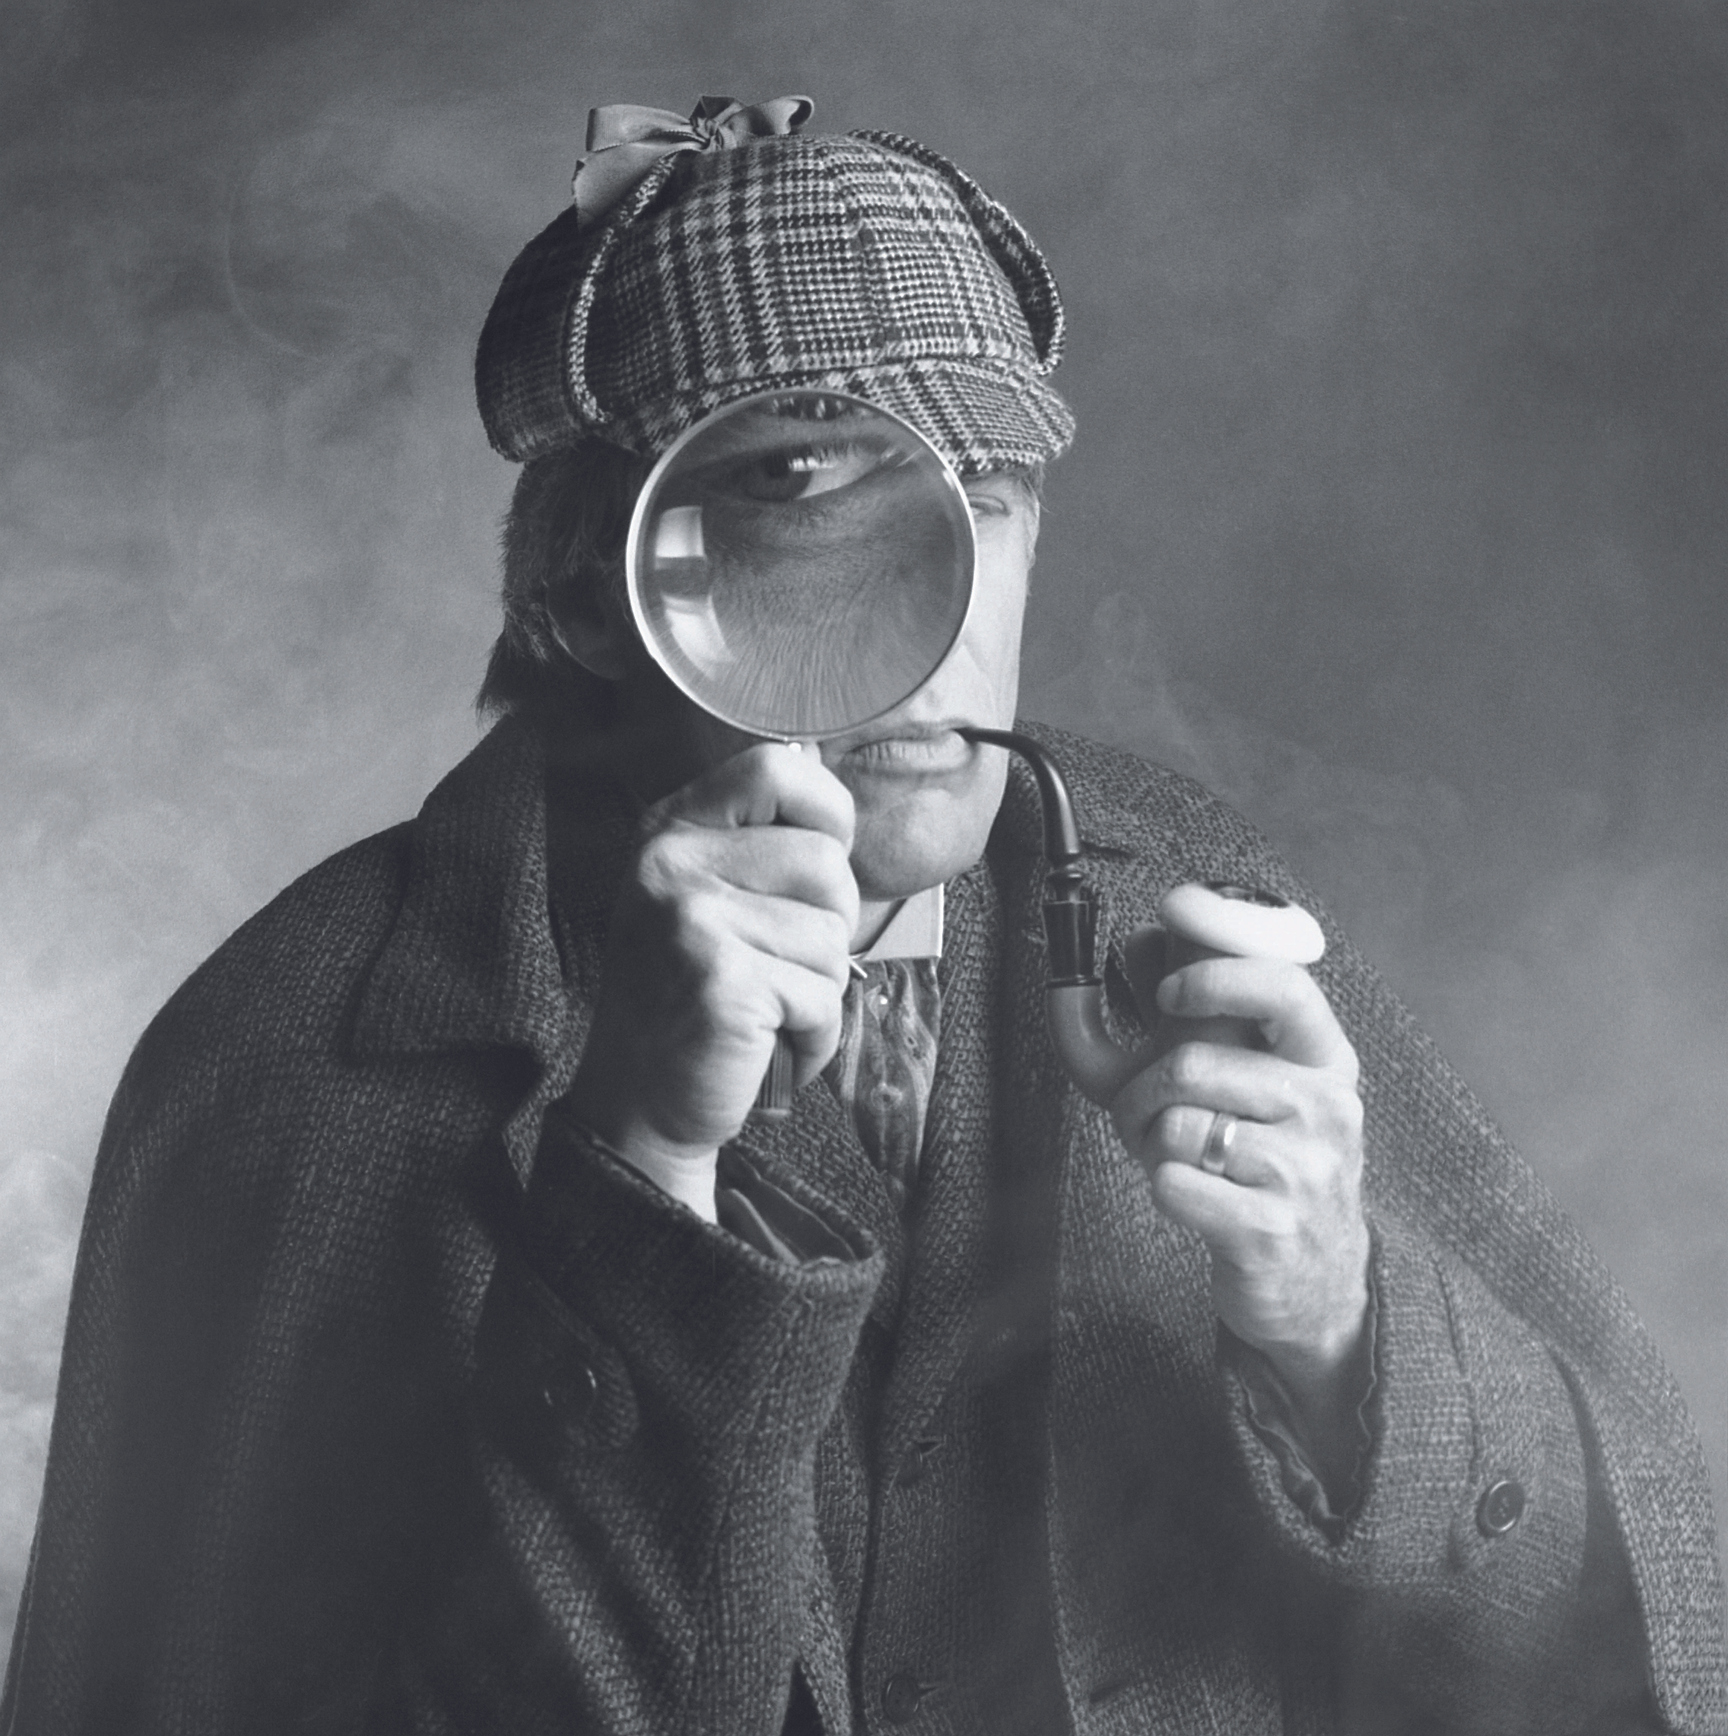 A Sherlock Holmes–type figure holding up a magnifying glass to their face and smoking a pipe